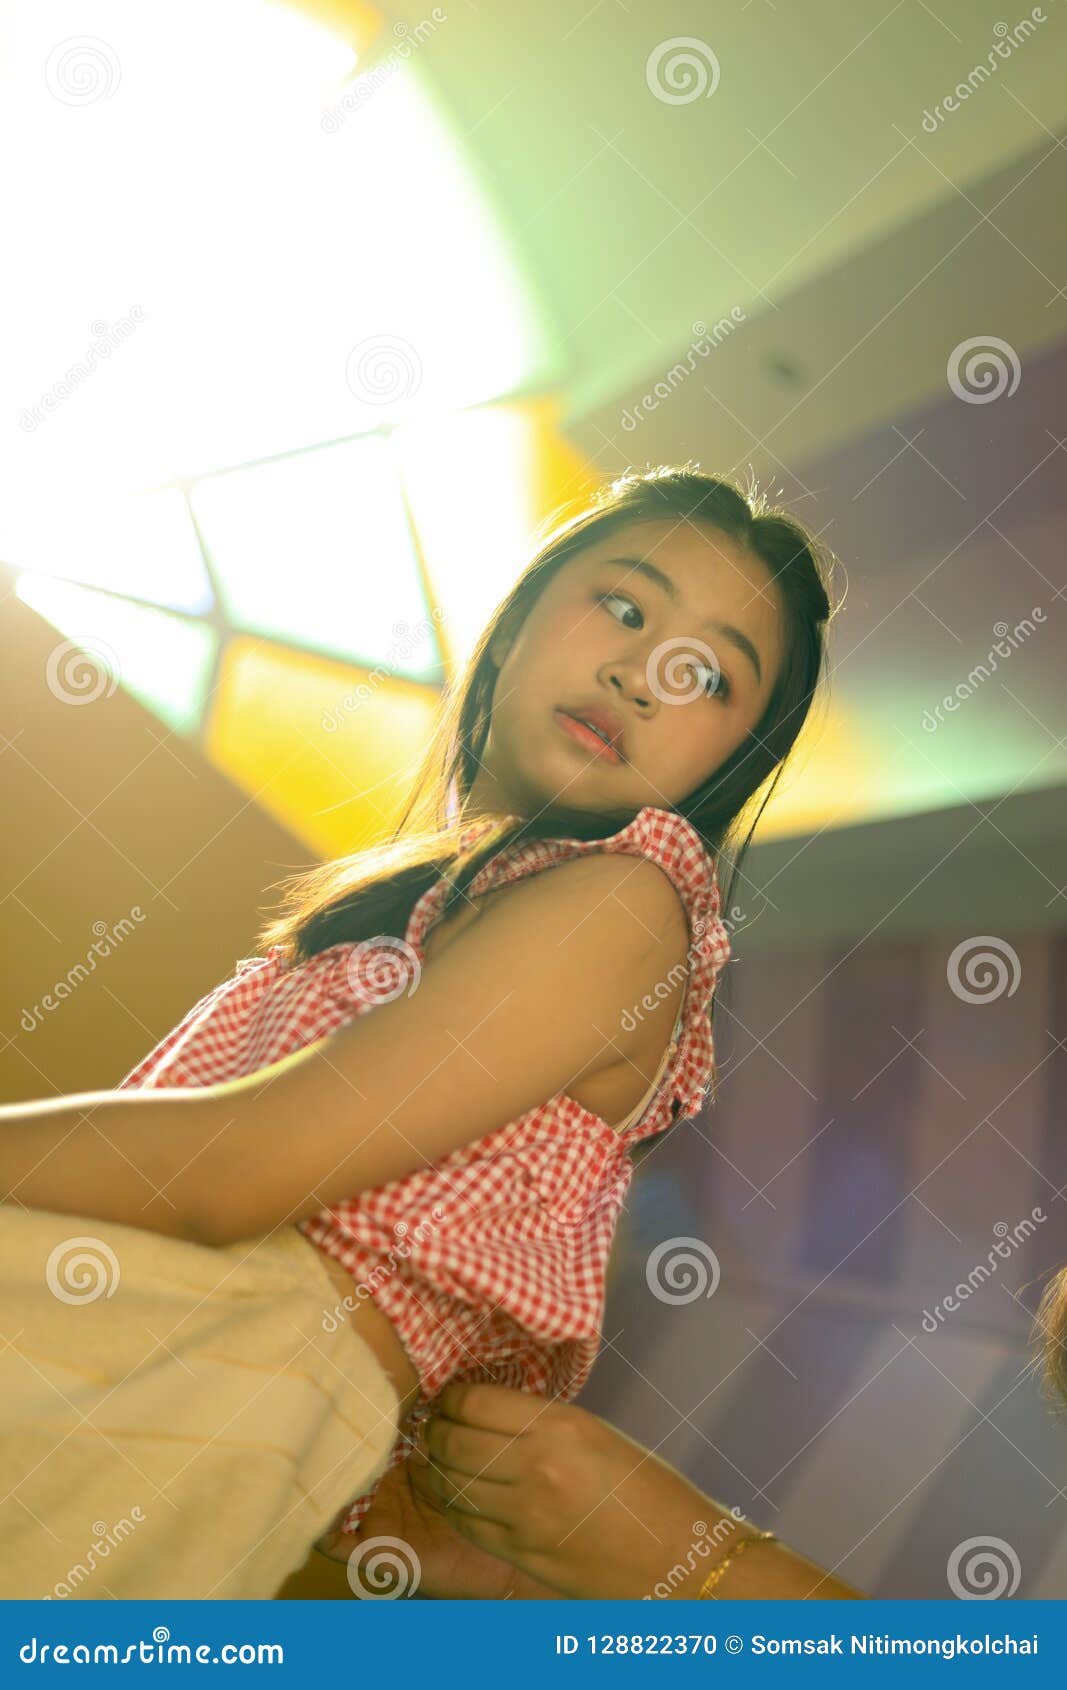 Barely Legal Asian Porn - Portrait of Young Asian Teenage Girl Stock Photo - Image of adult,  beautiful: 128822370